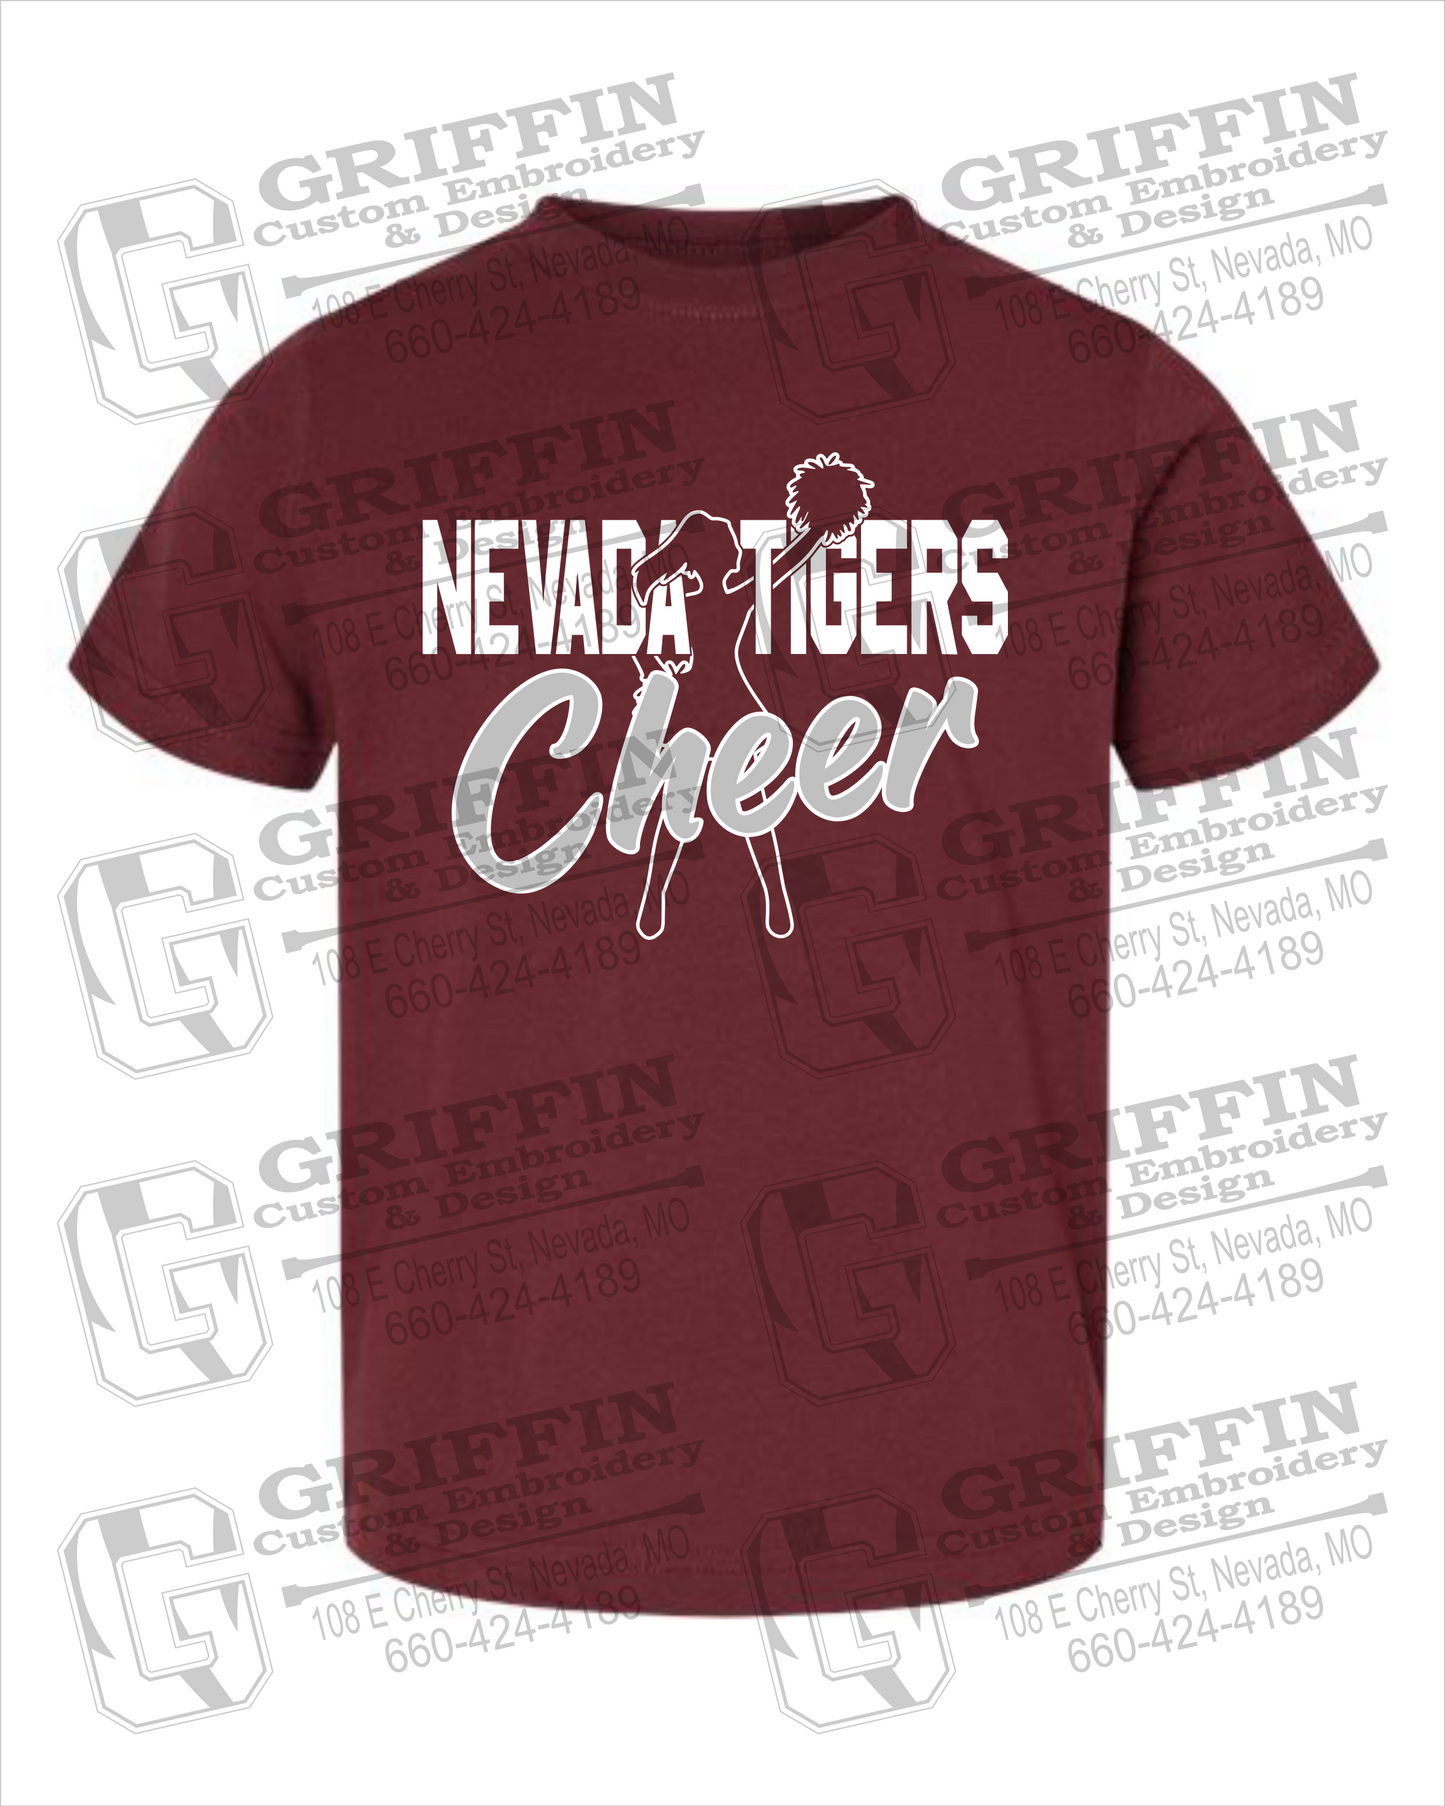 Nevada Tigers 24-A Toddler/Infant T-Shirt - Cheer